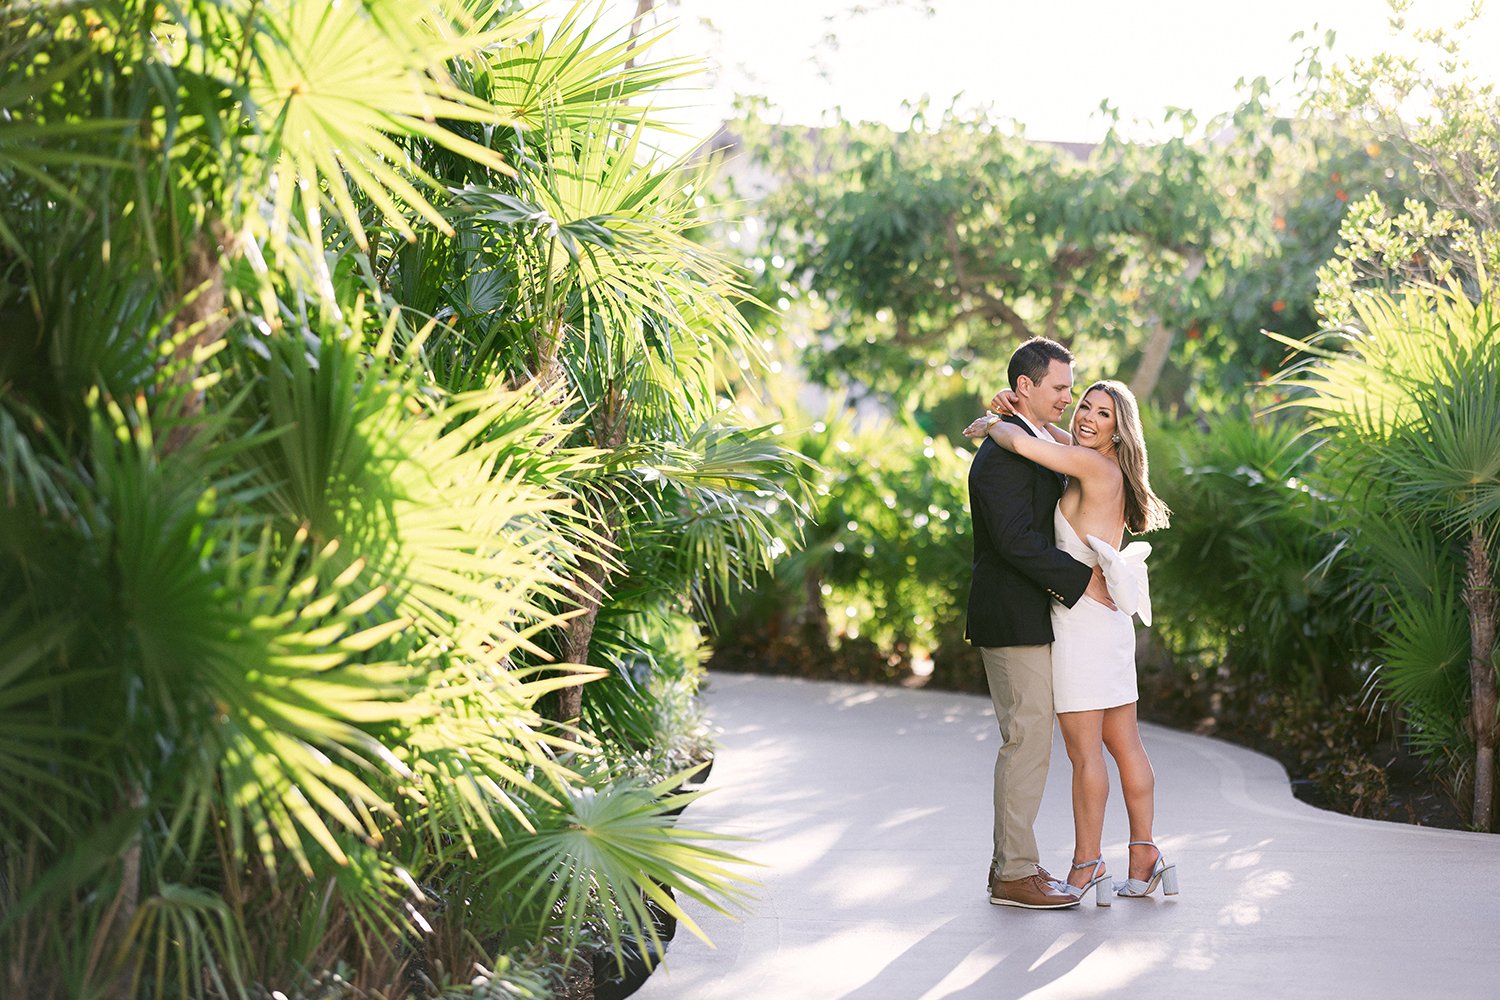 03 cute wide photography of smiling bride in white dress hugging groom with palm trees and nature behind at Dreams Riviera Cancun.JPG